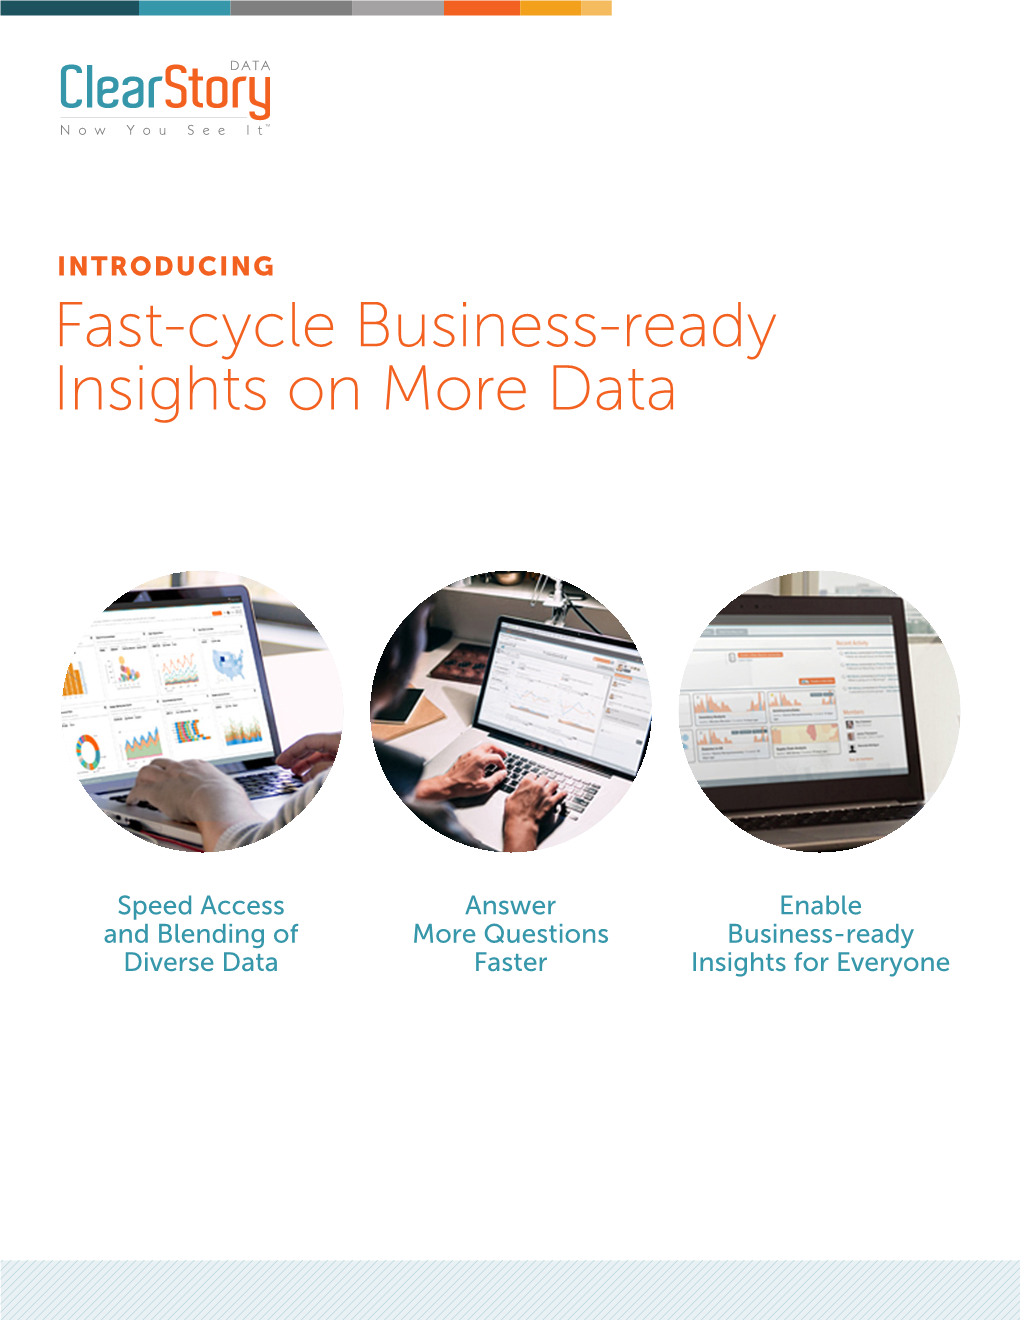 Fast-Cycle Business-Ready Insights on More Data